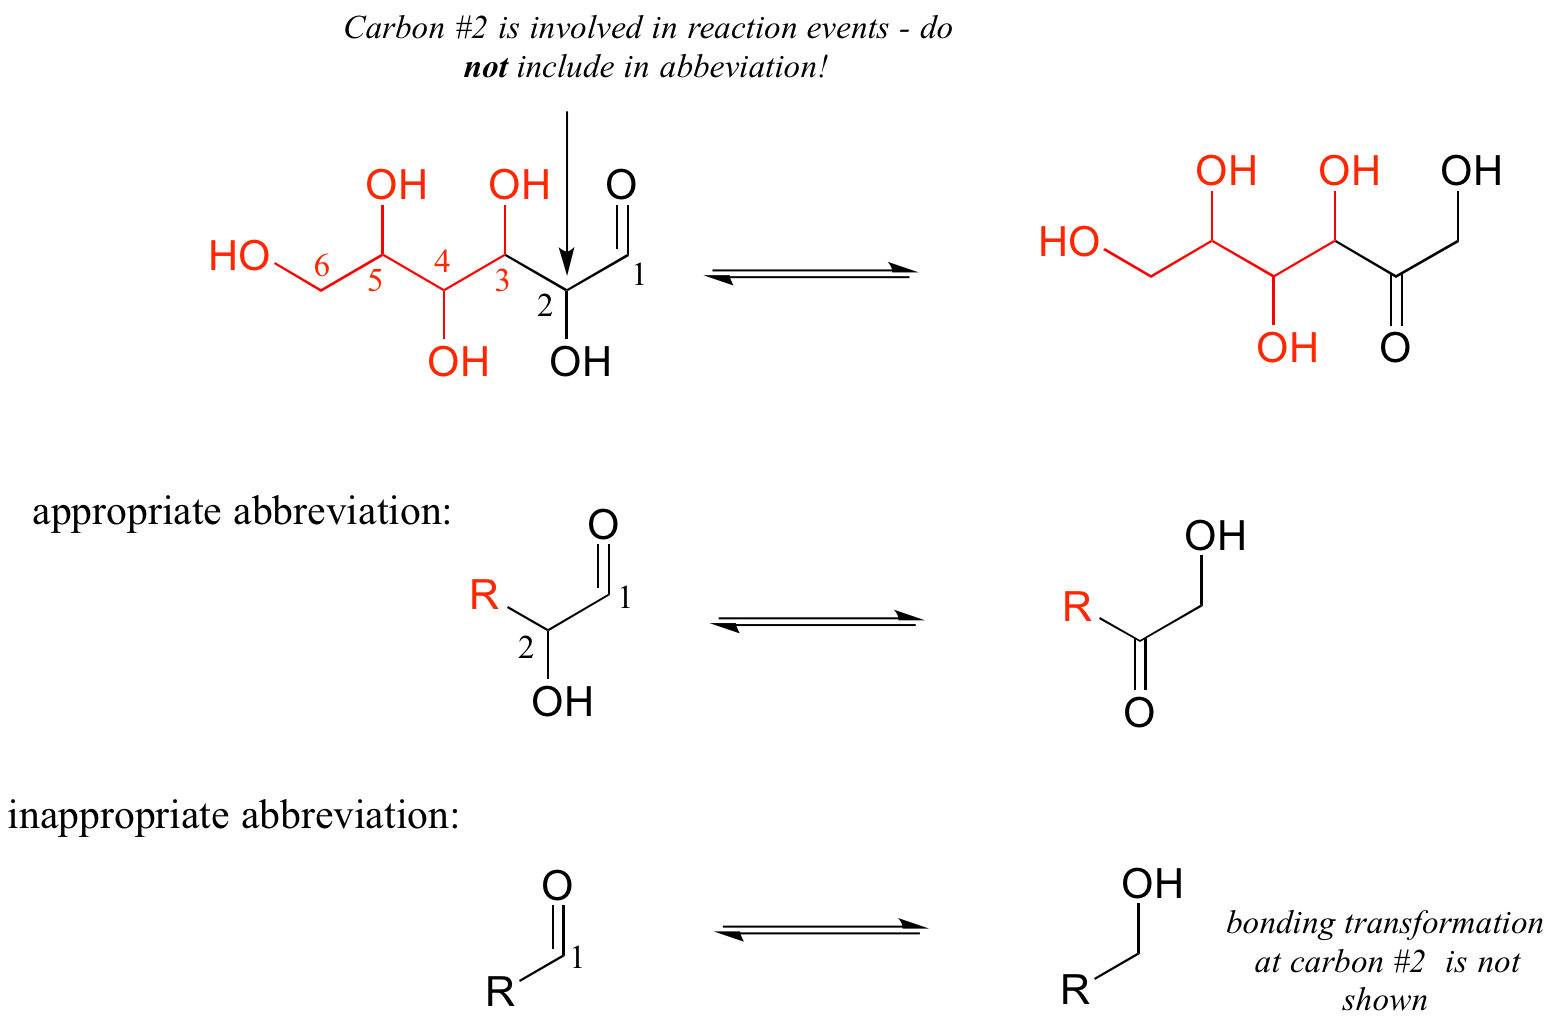 Reaction of a six carbon chain with five hydroxy groups and one carbonyl group. Part of molecule involved in R abbreviation colored red. Carbon #2 is involved in reaction events  so is not included in abbreviation. Appropriate abbreviation: carbon 2 is not involved in abbreviation. Inappropriate abbreviation: carbon 2 in R abbreviation. Bonding transformation at carbon #2 is not shown in the inappropriate abbreviation example.